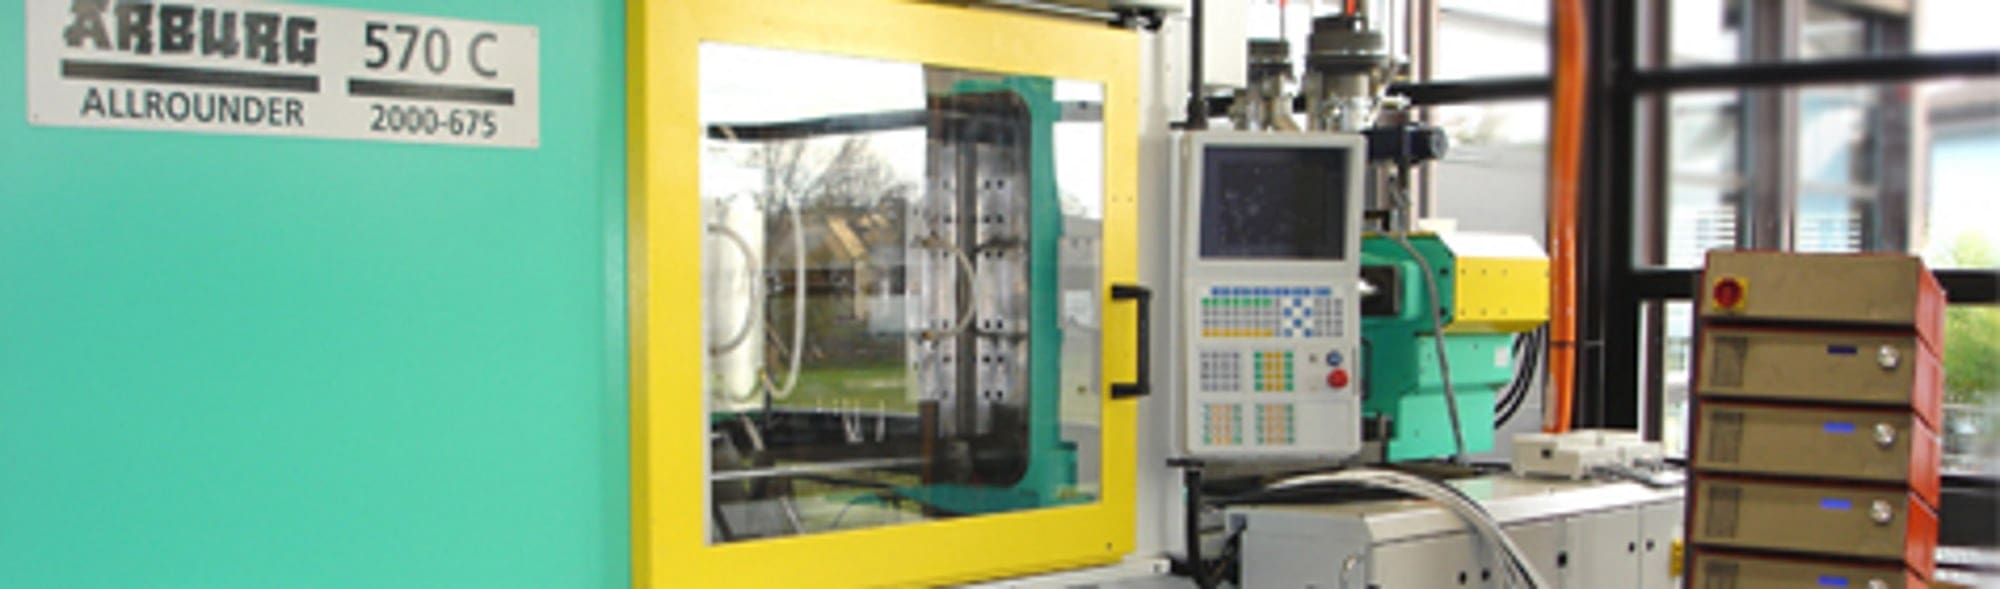 In the field of injection moulding/PUR, the institute deals with the entire value chain